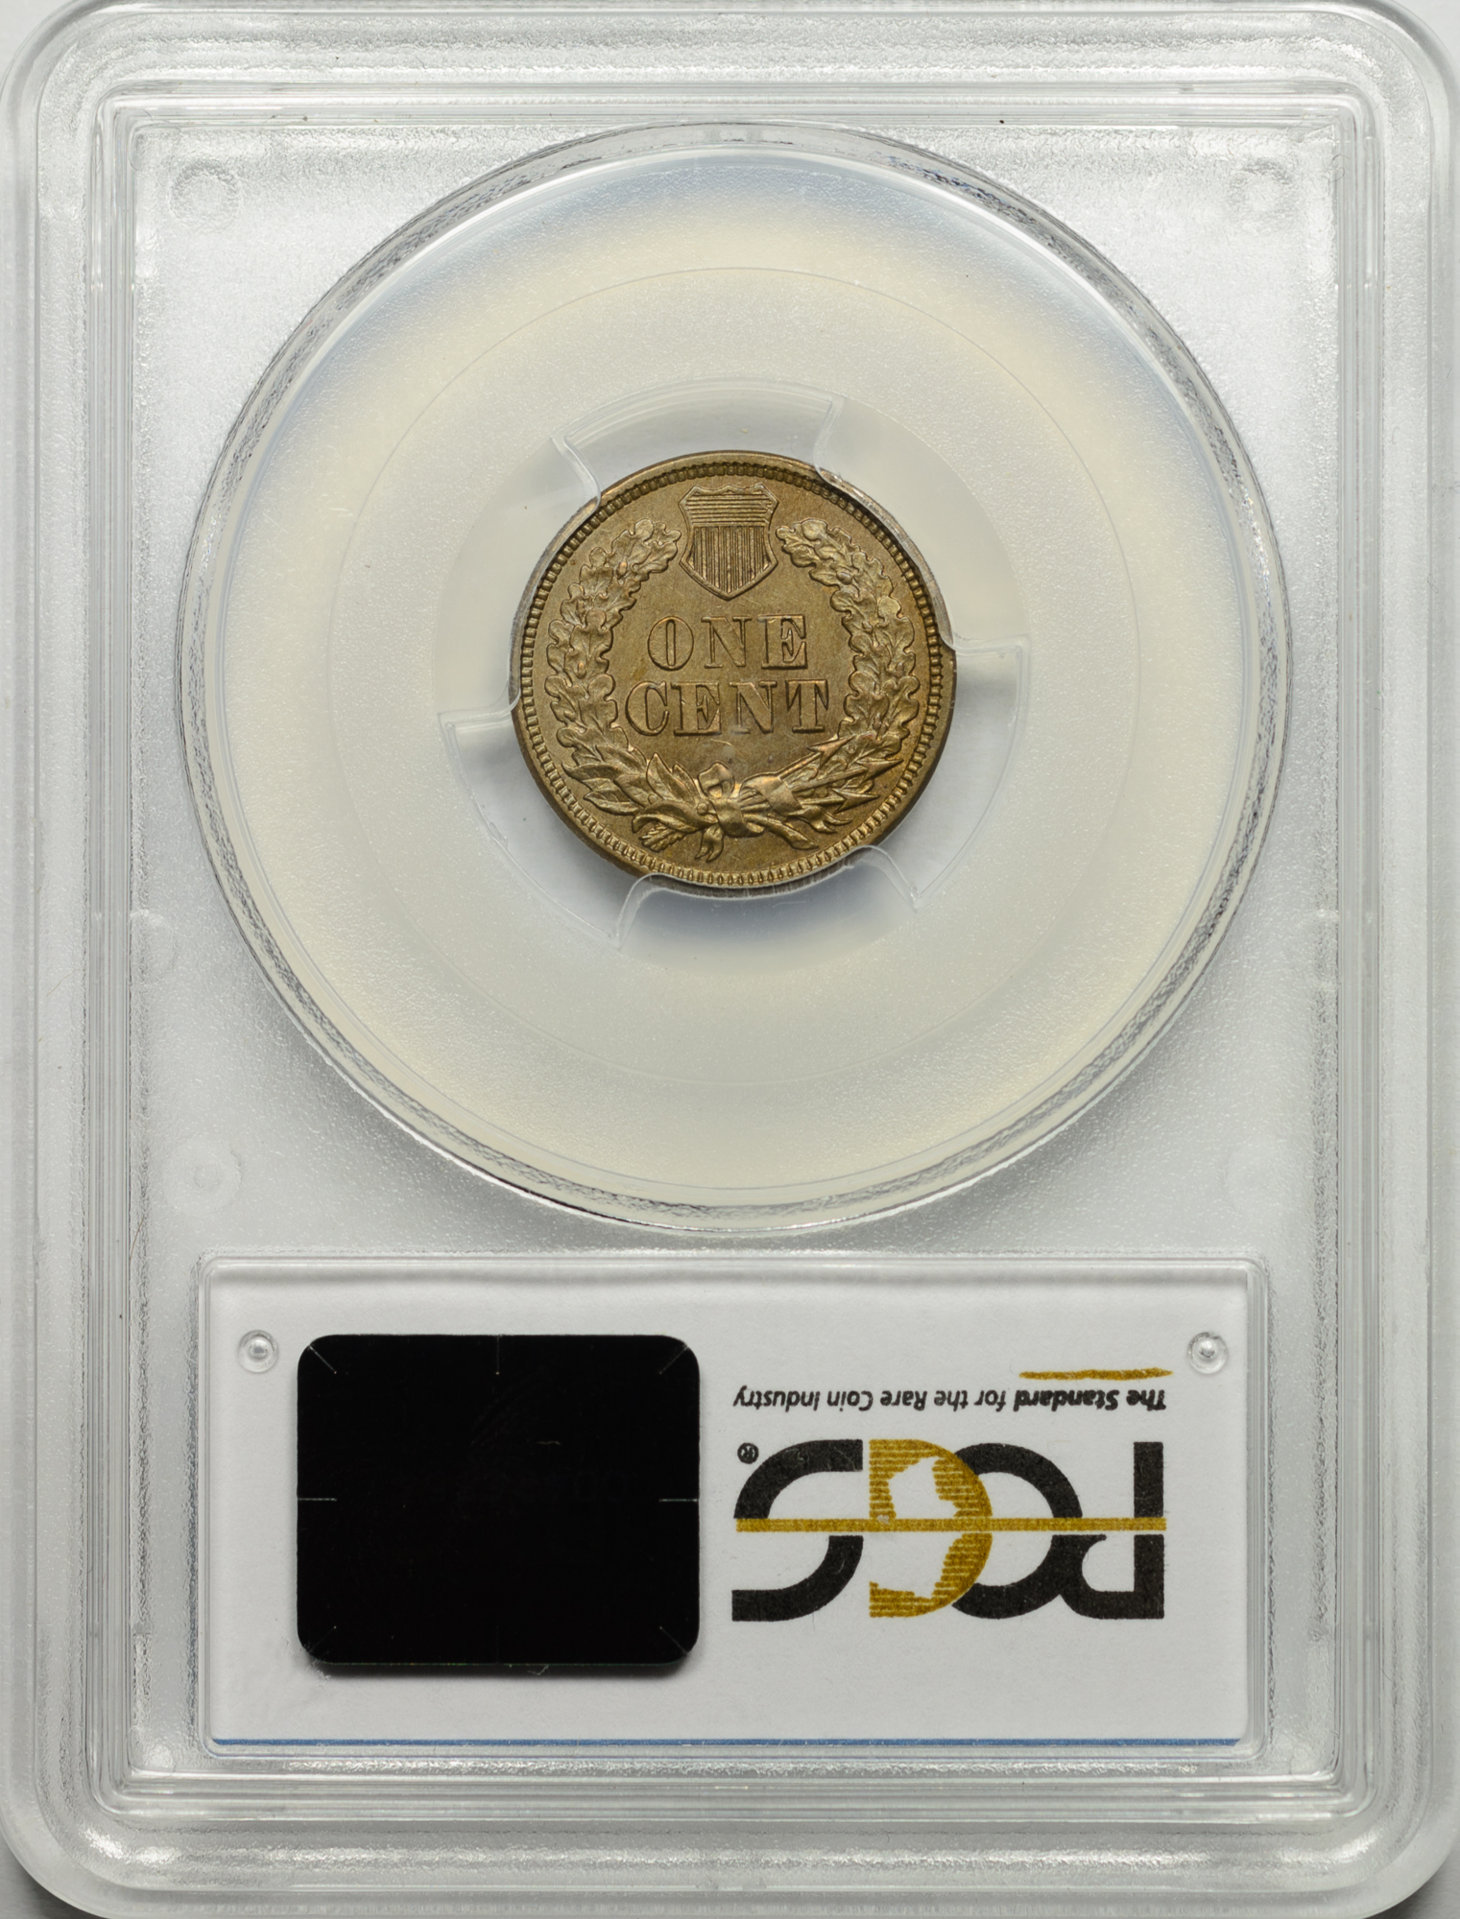 1863 1C CENT - INDIAN HEAD, COPPER-NICKEL WITH SHIELD PCGS MS62 29758223 CAC Rev Slab.jpg